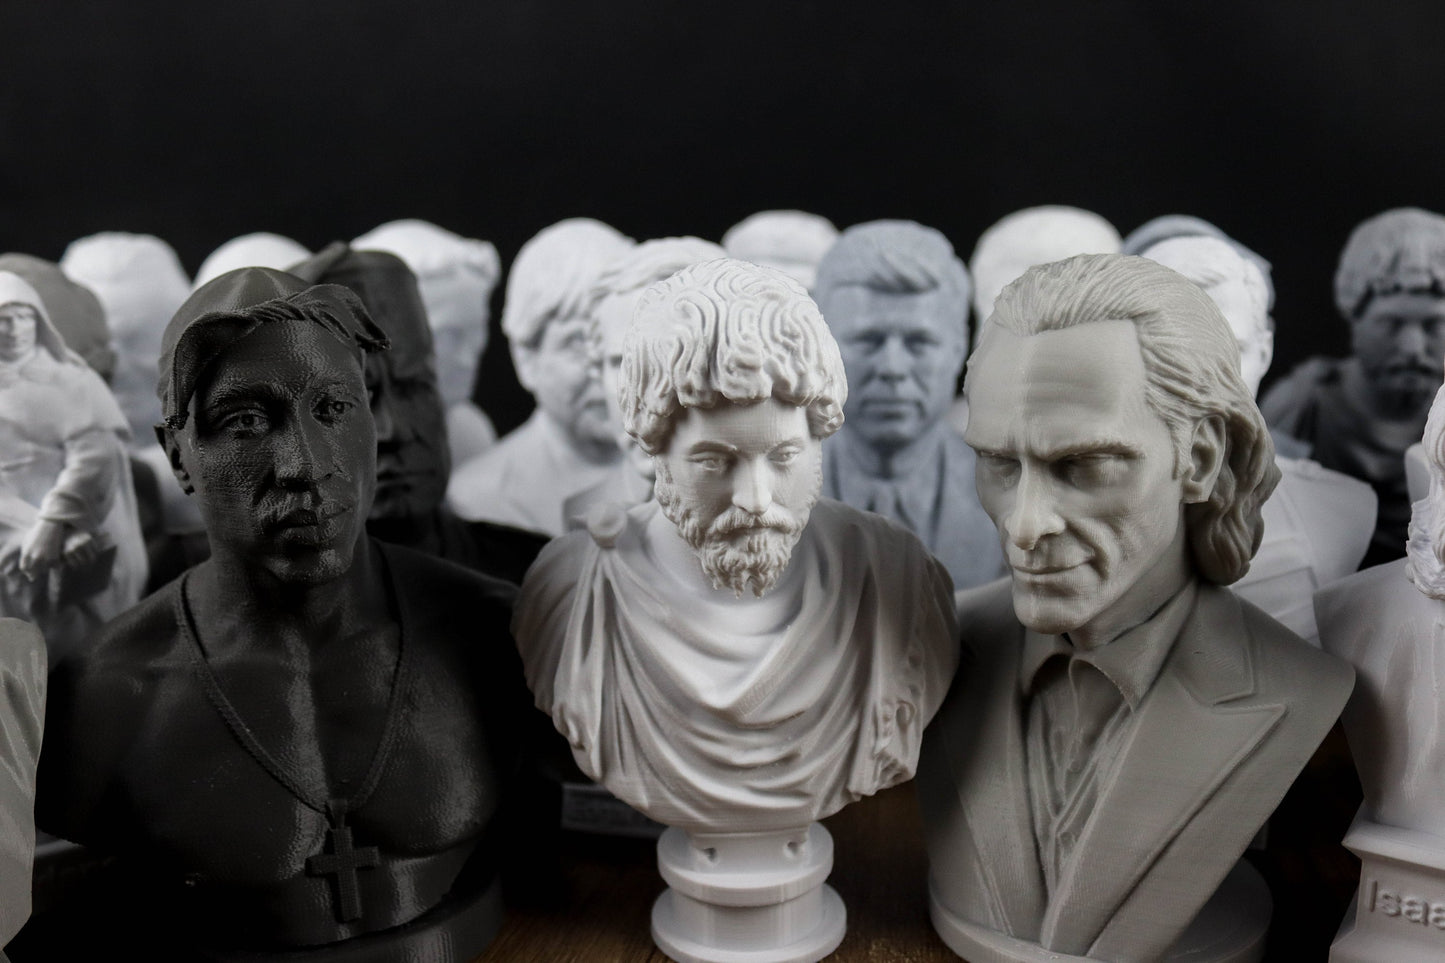 Pack of 3 Busts: 5, 6", 7", 8", 10" Sculptures (from the existing collection!), Value Pack